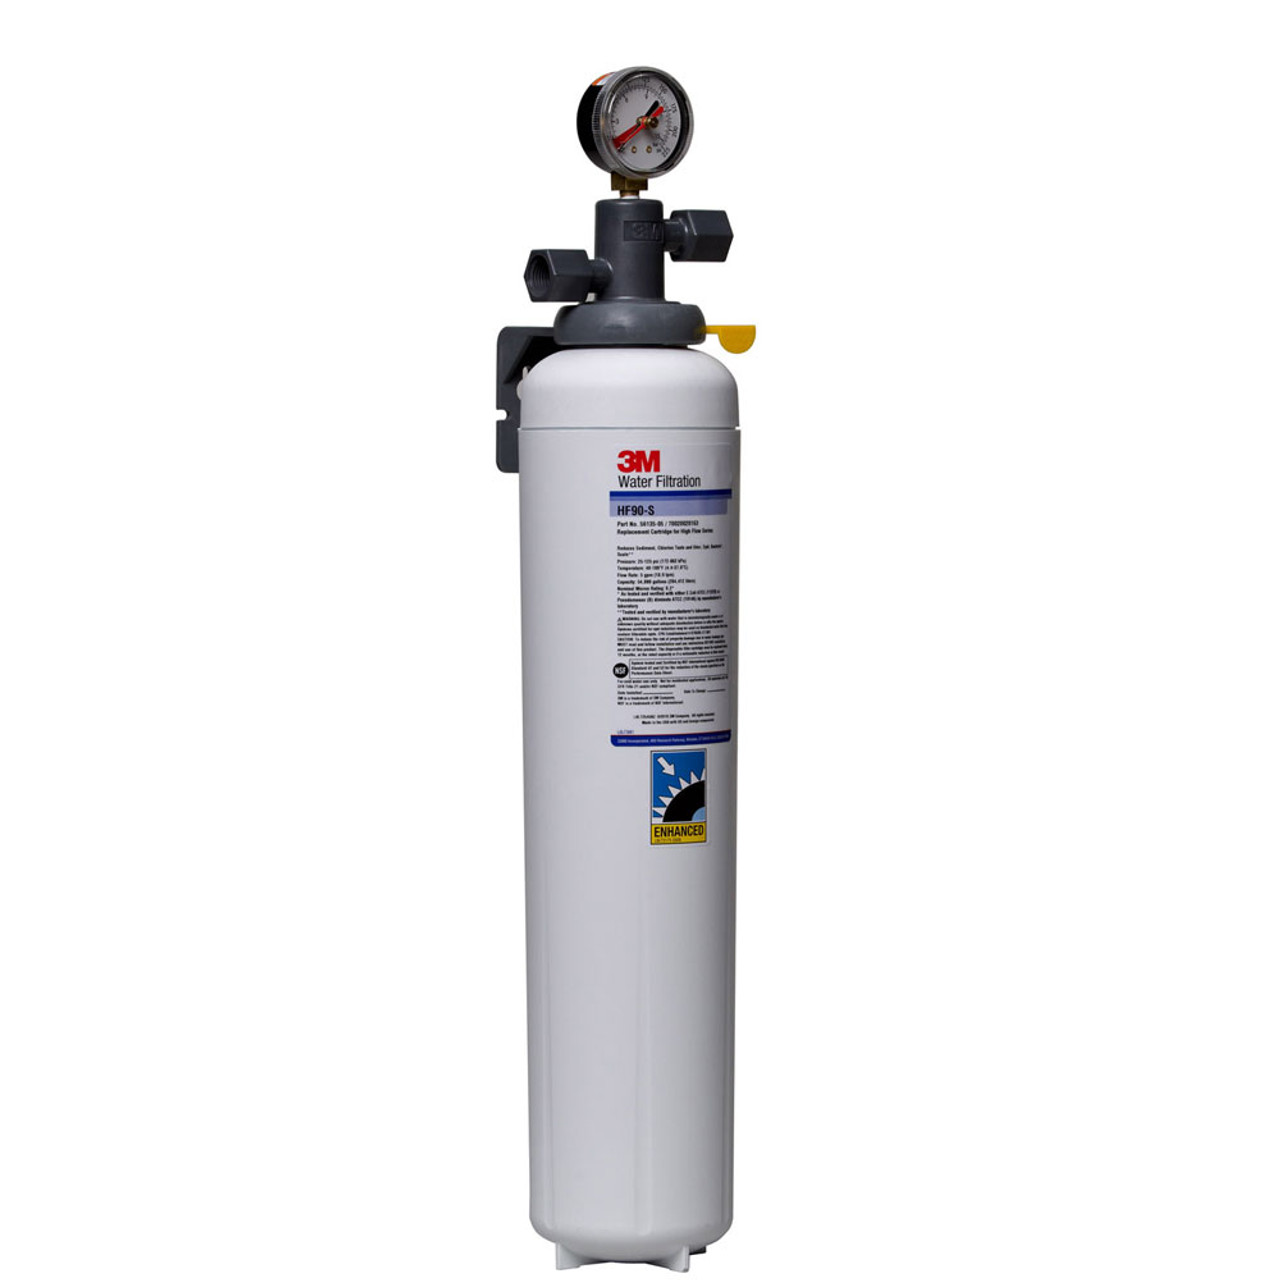 3M™Water Filtration Products ICE190-S Ice Filtration System 56164-03